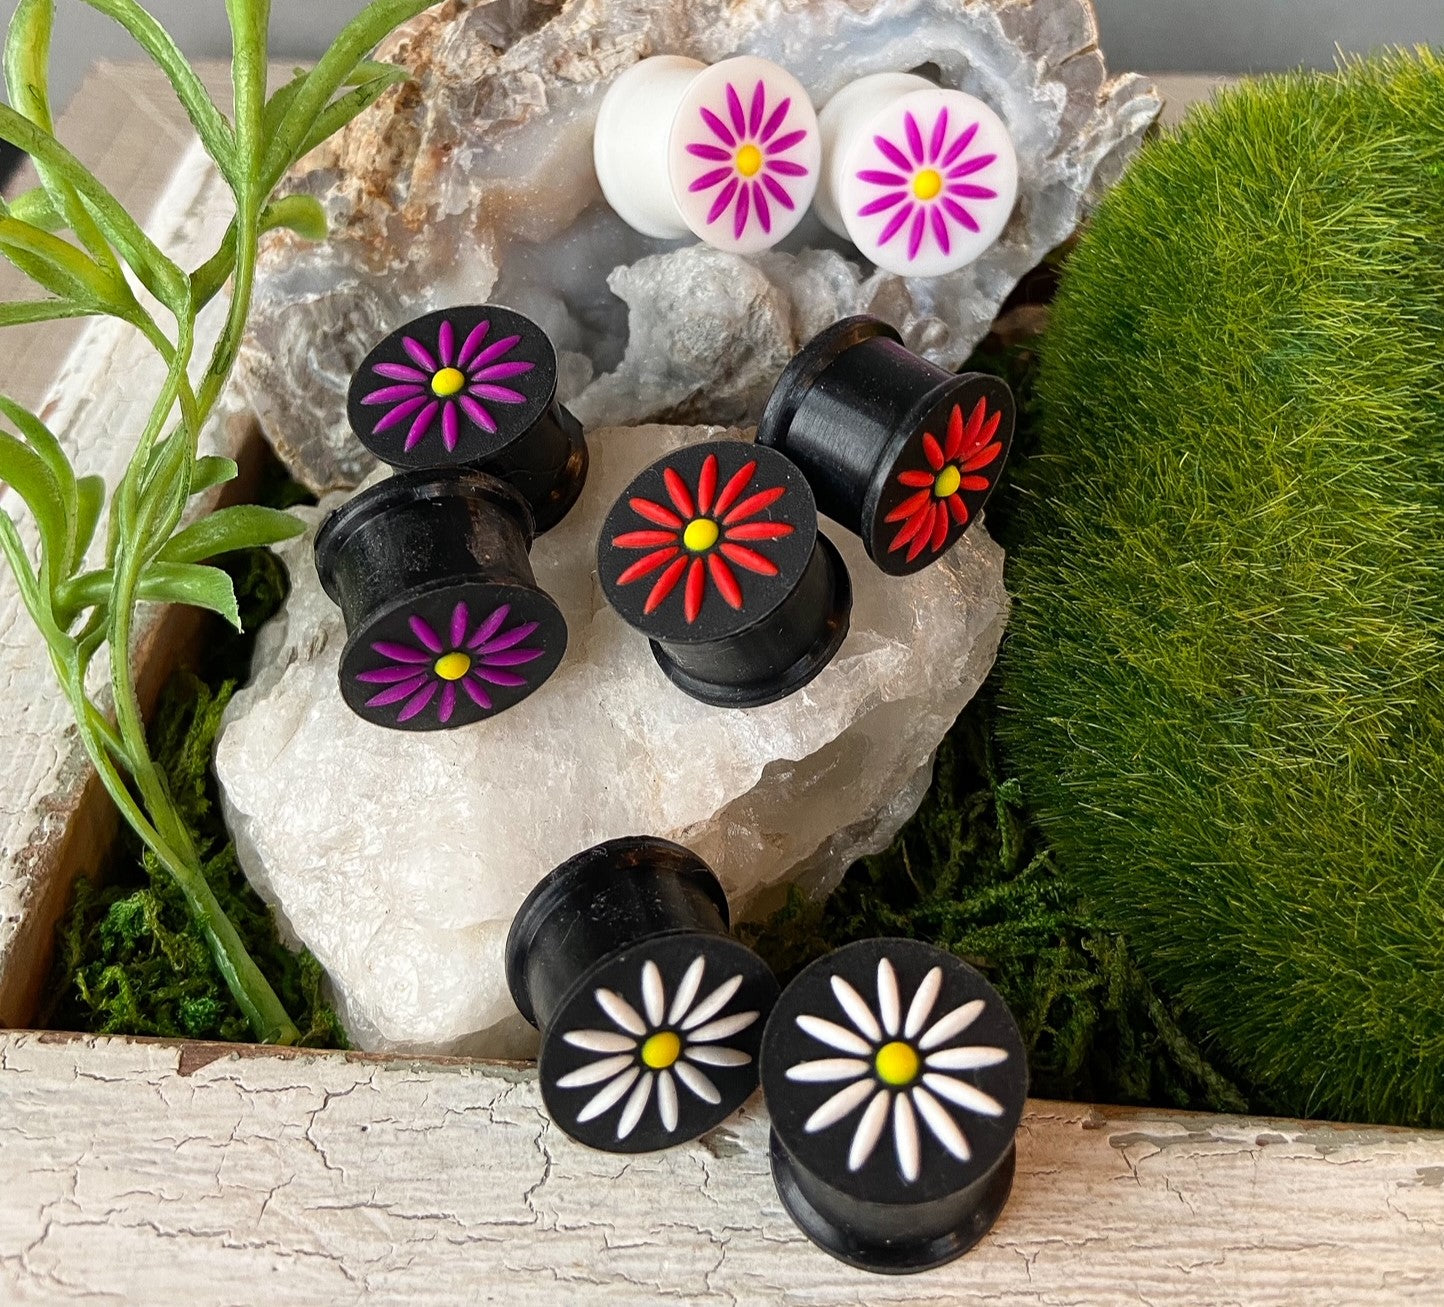 ALL 4 PAIR Silicone Plugs w/ Raised Flower Earlets Gauges Tunnels Body Jewelry